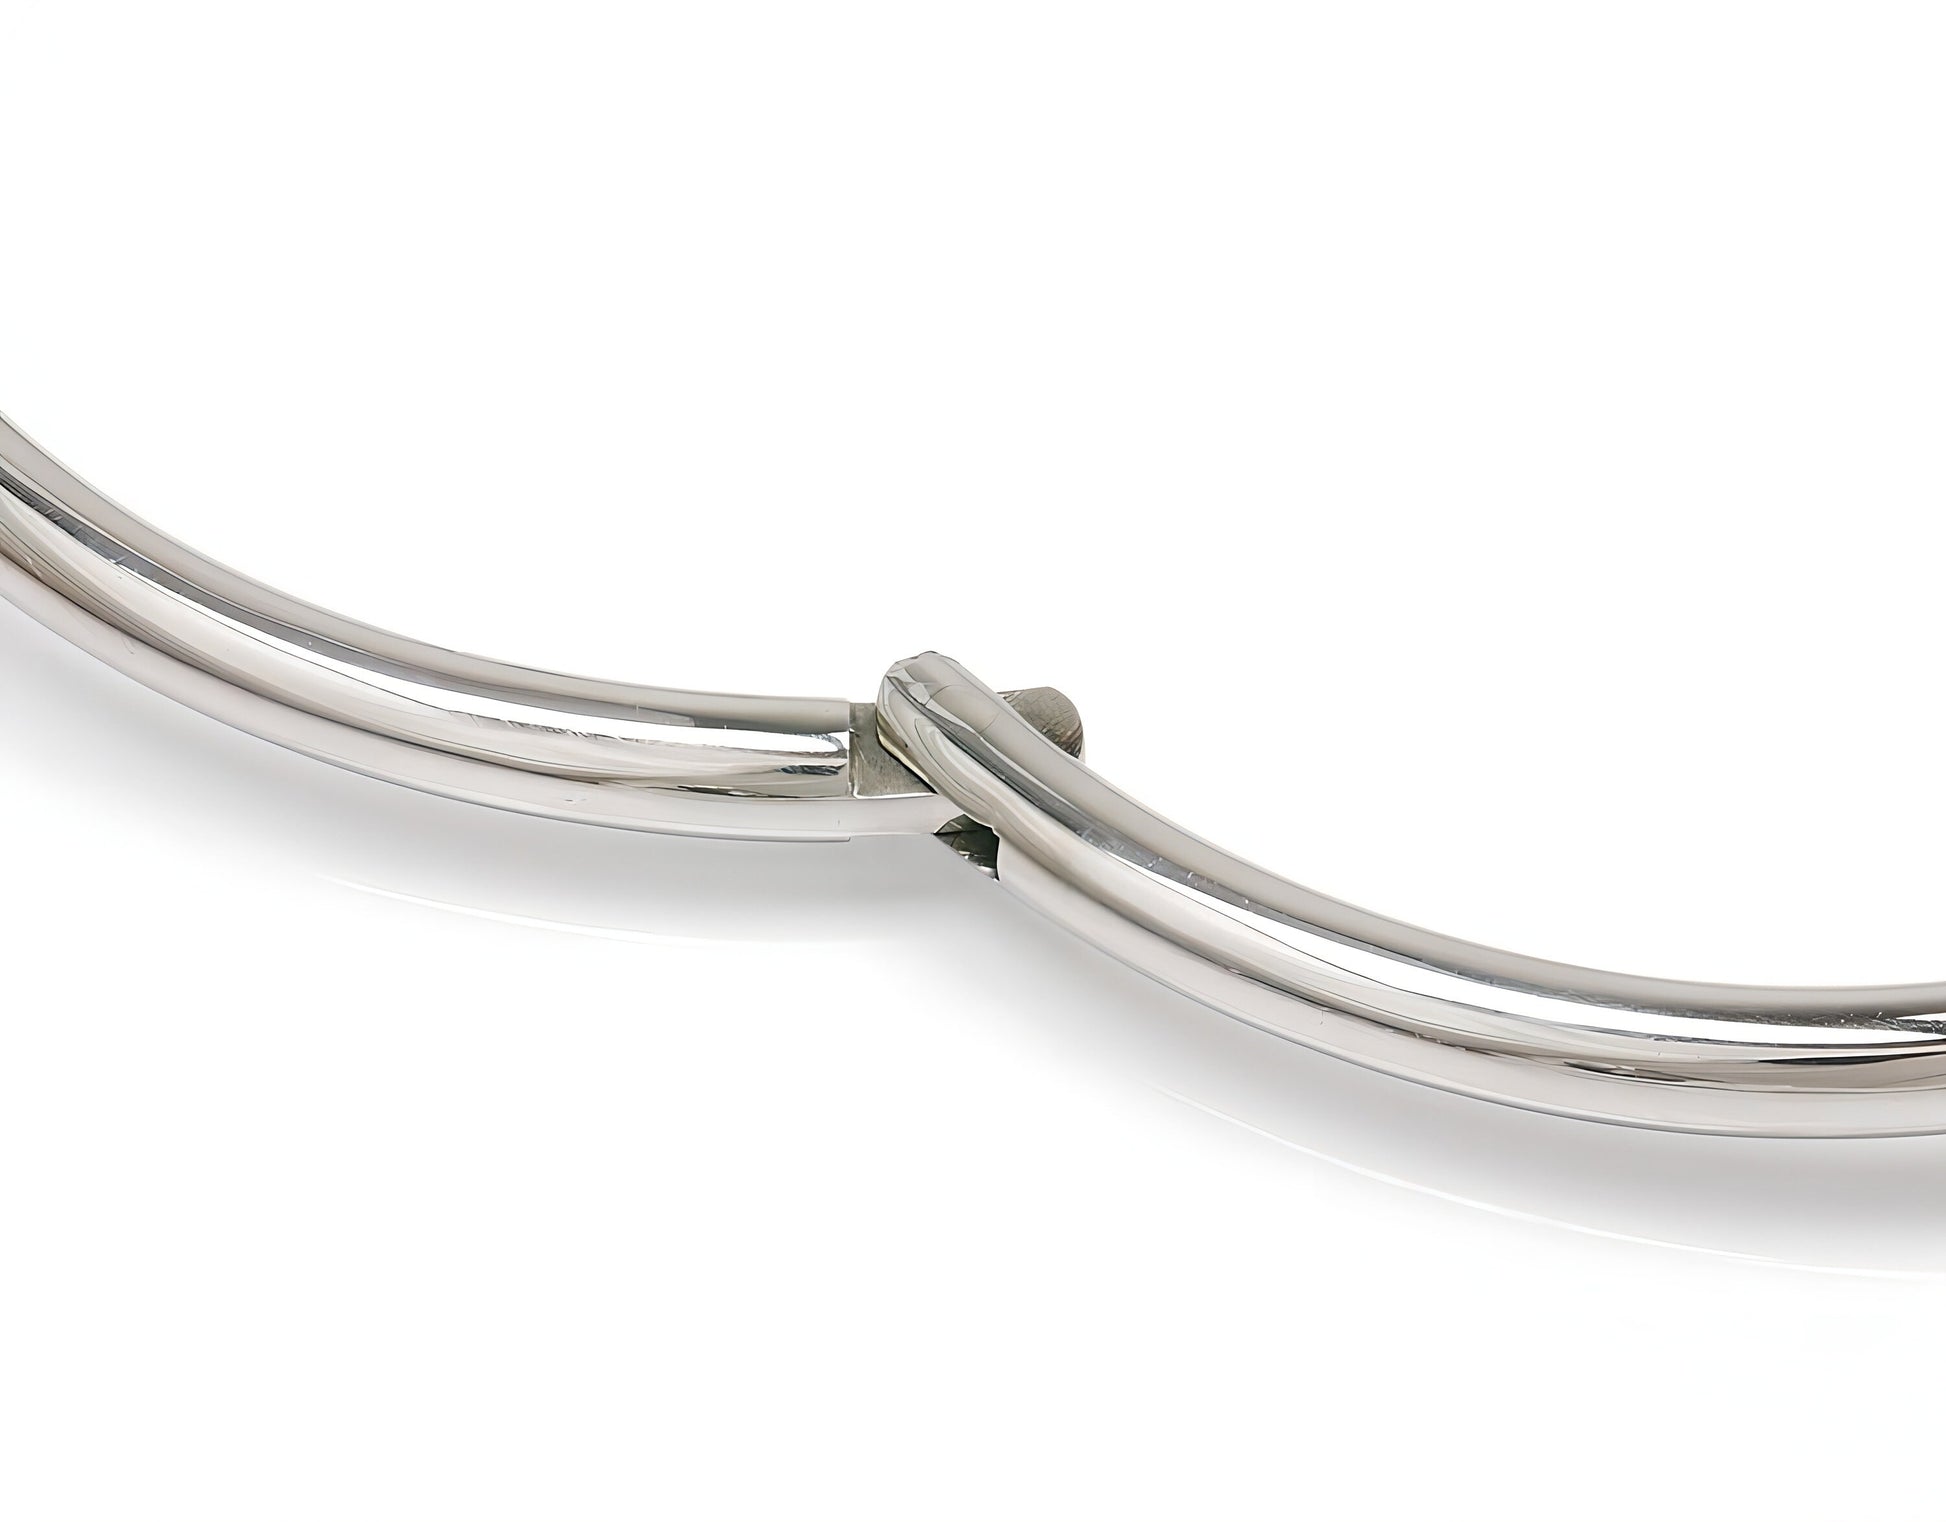 Curved slave neck bracelet with lock 11 mm thickness, circumference 35 cm